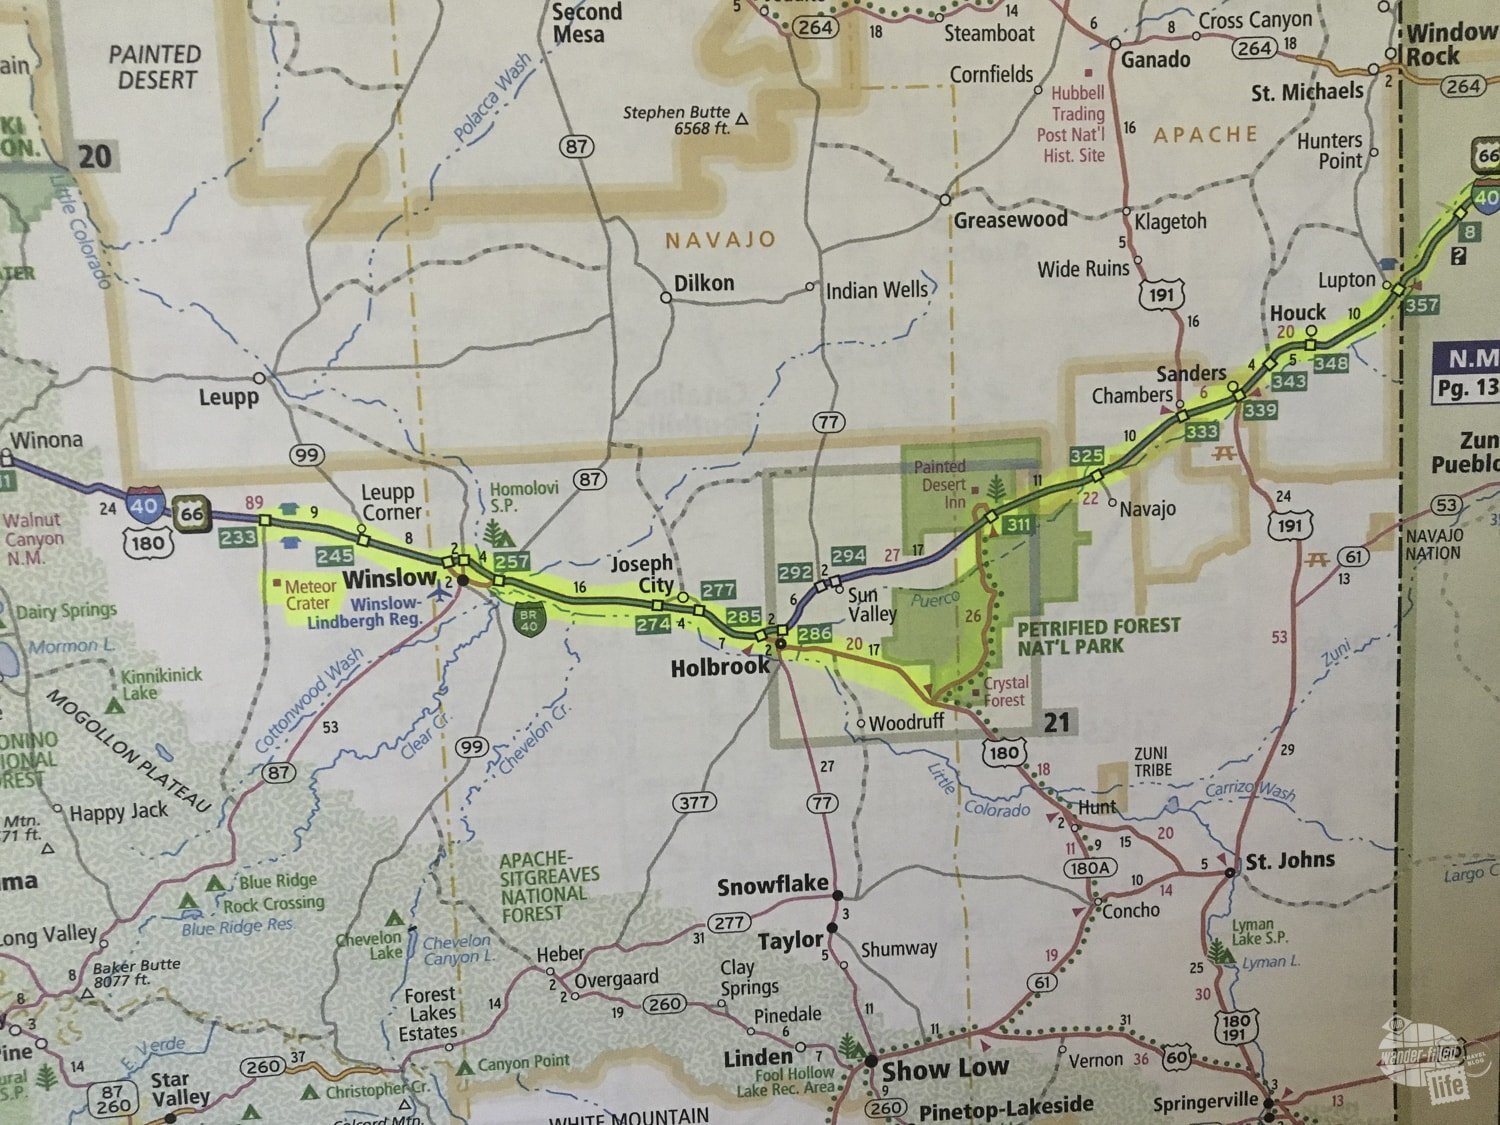 Map of our route in northern Arizona following part of old Route 66.